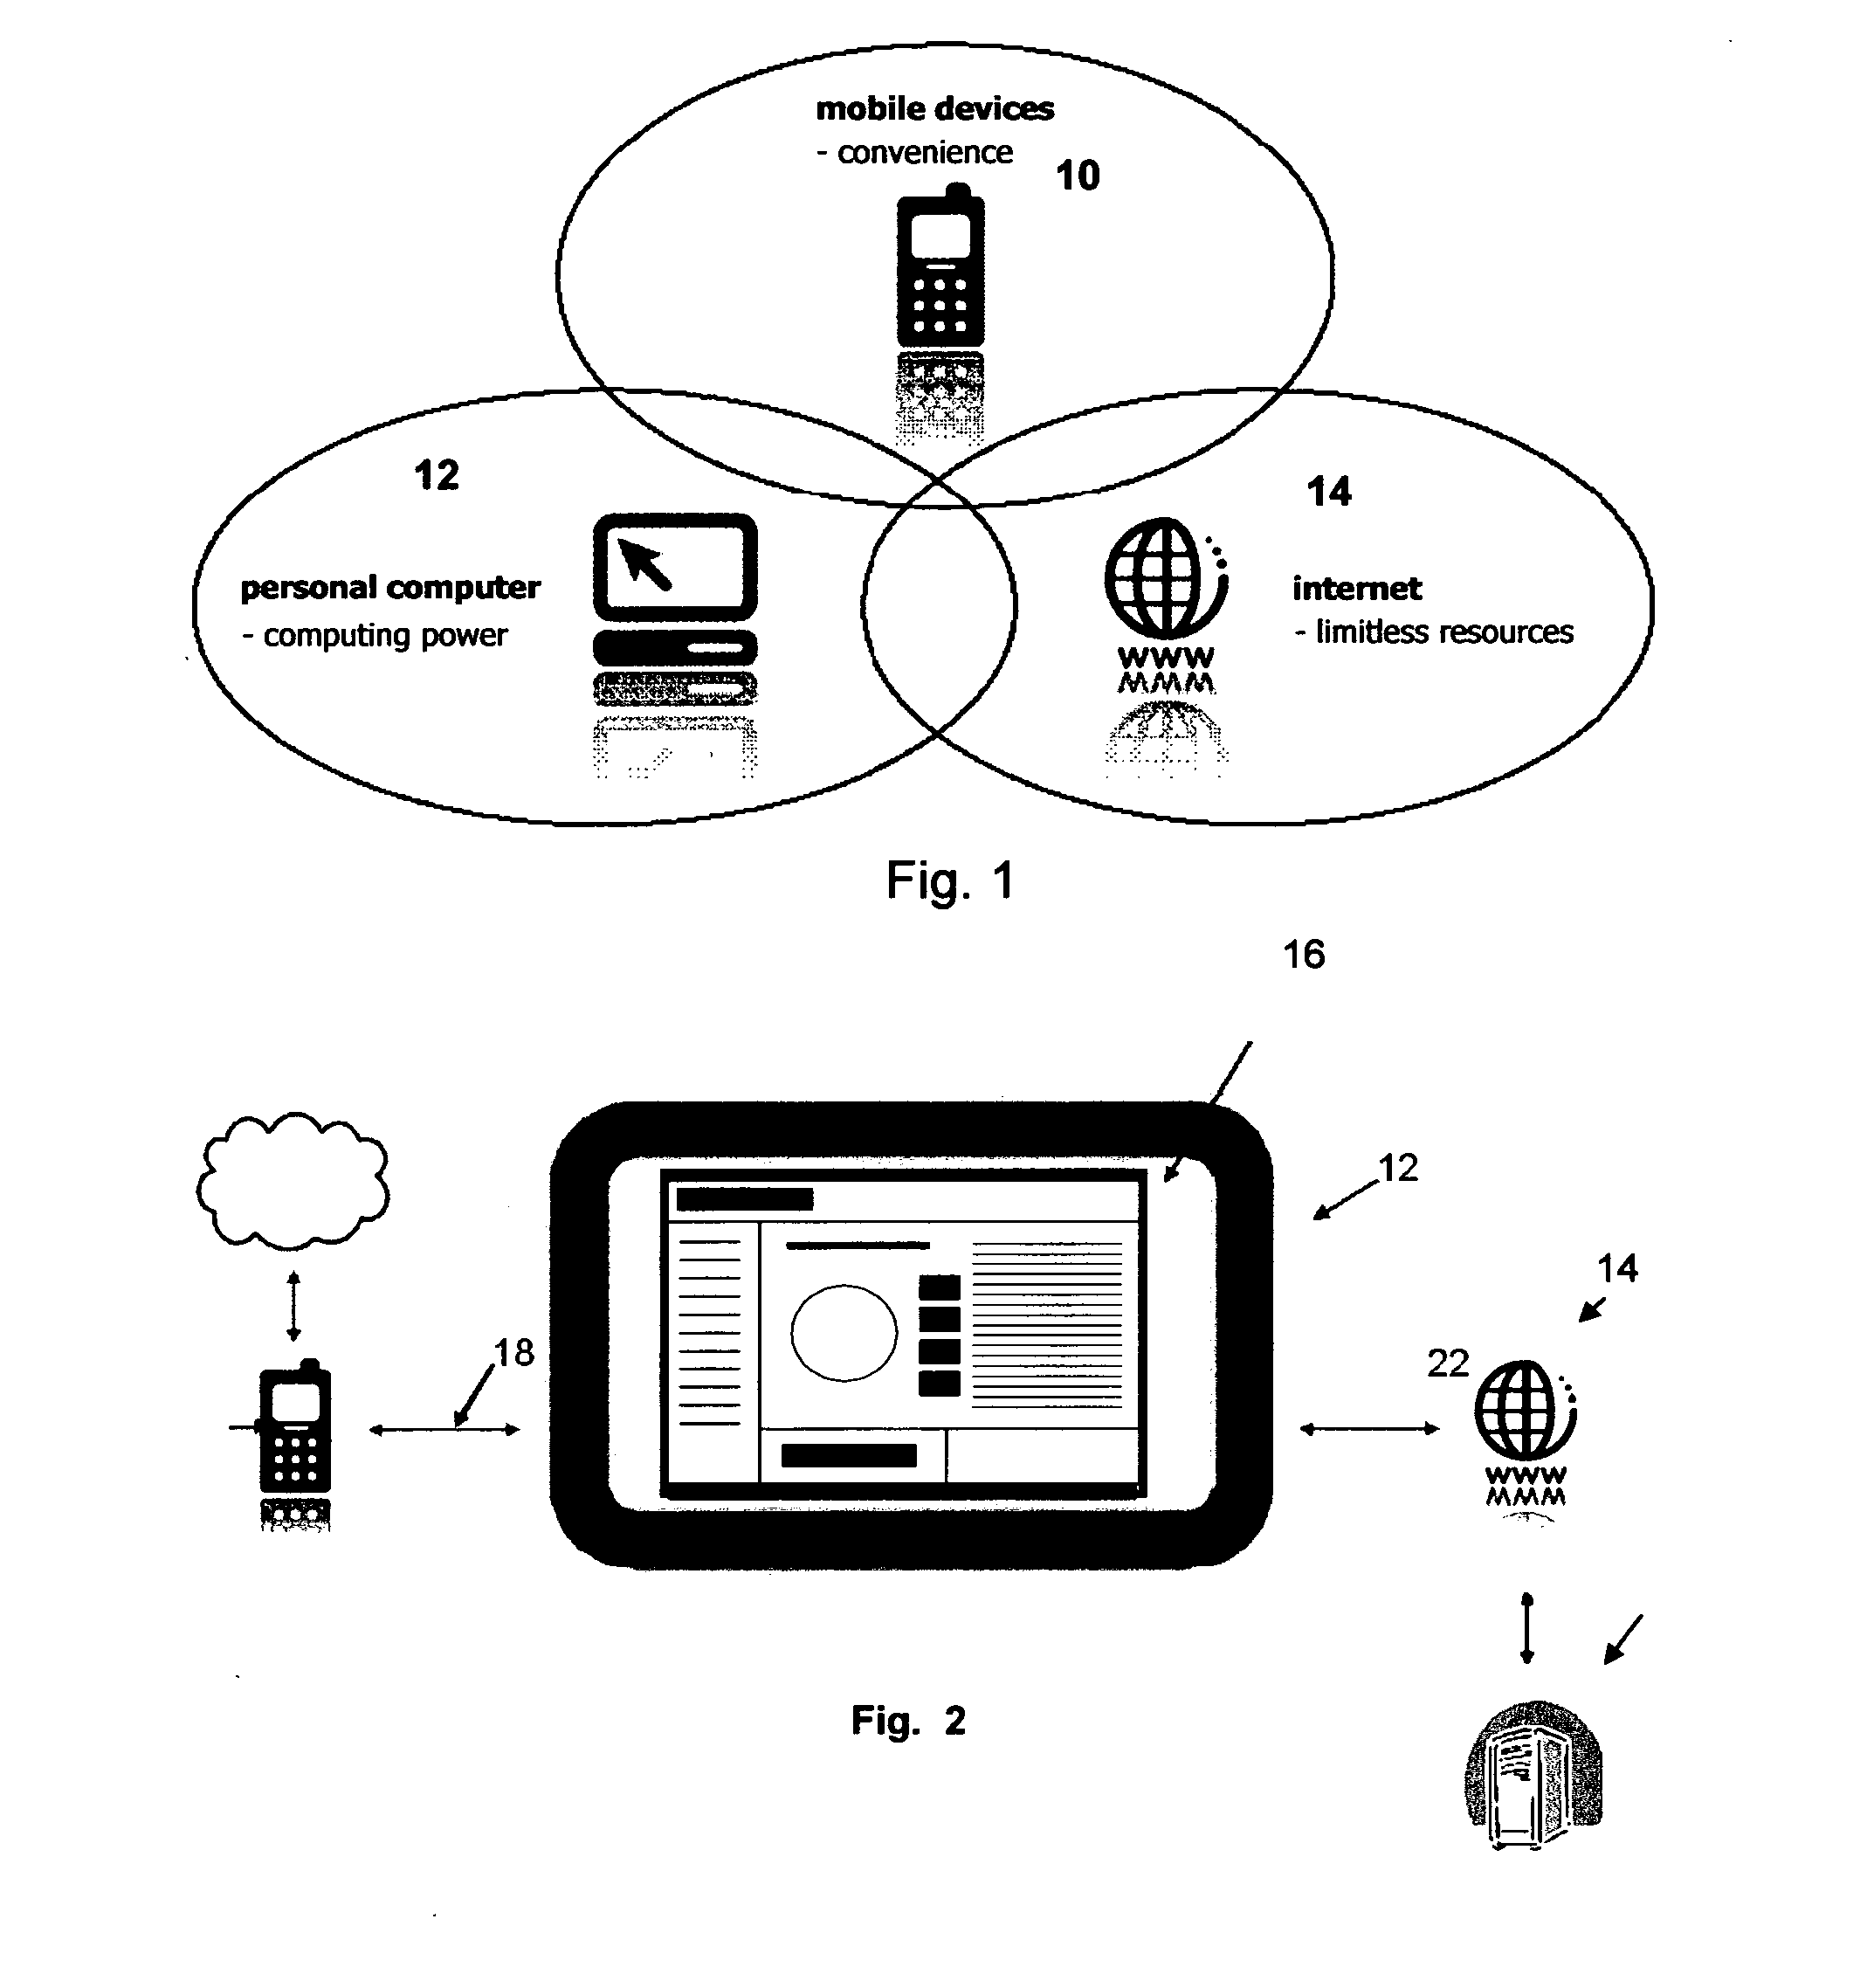 Method of loading software in mobile and desktop environments